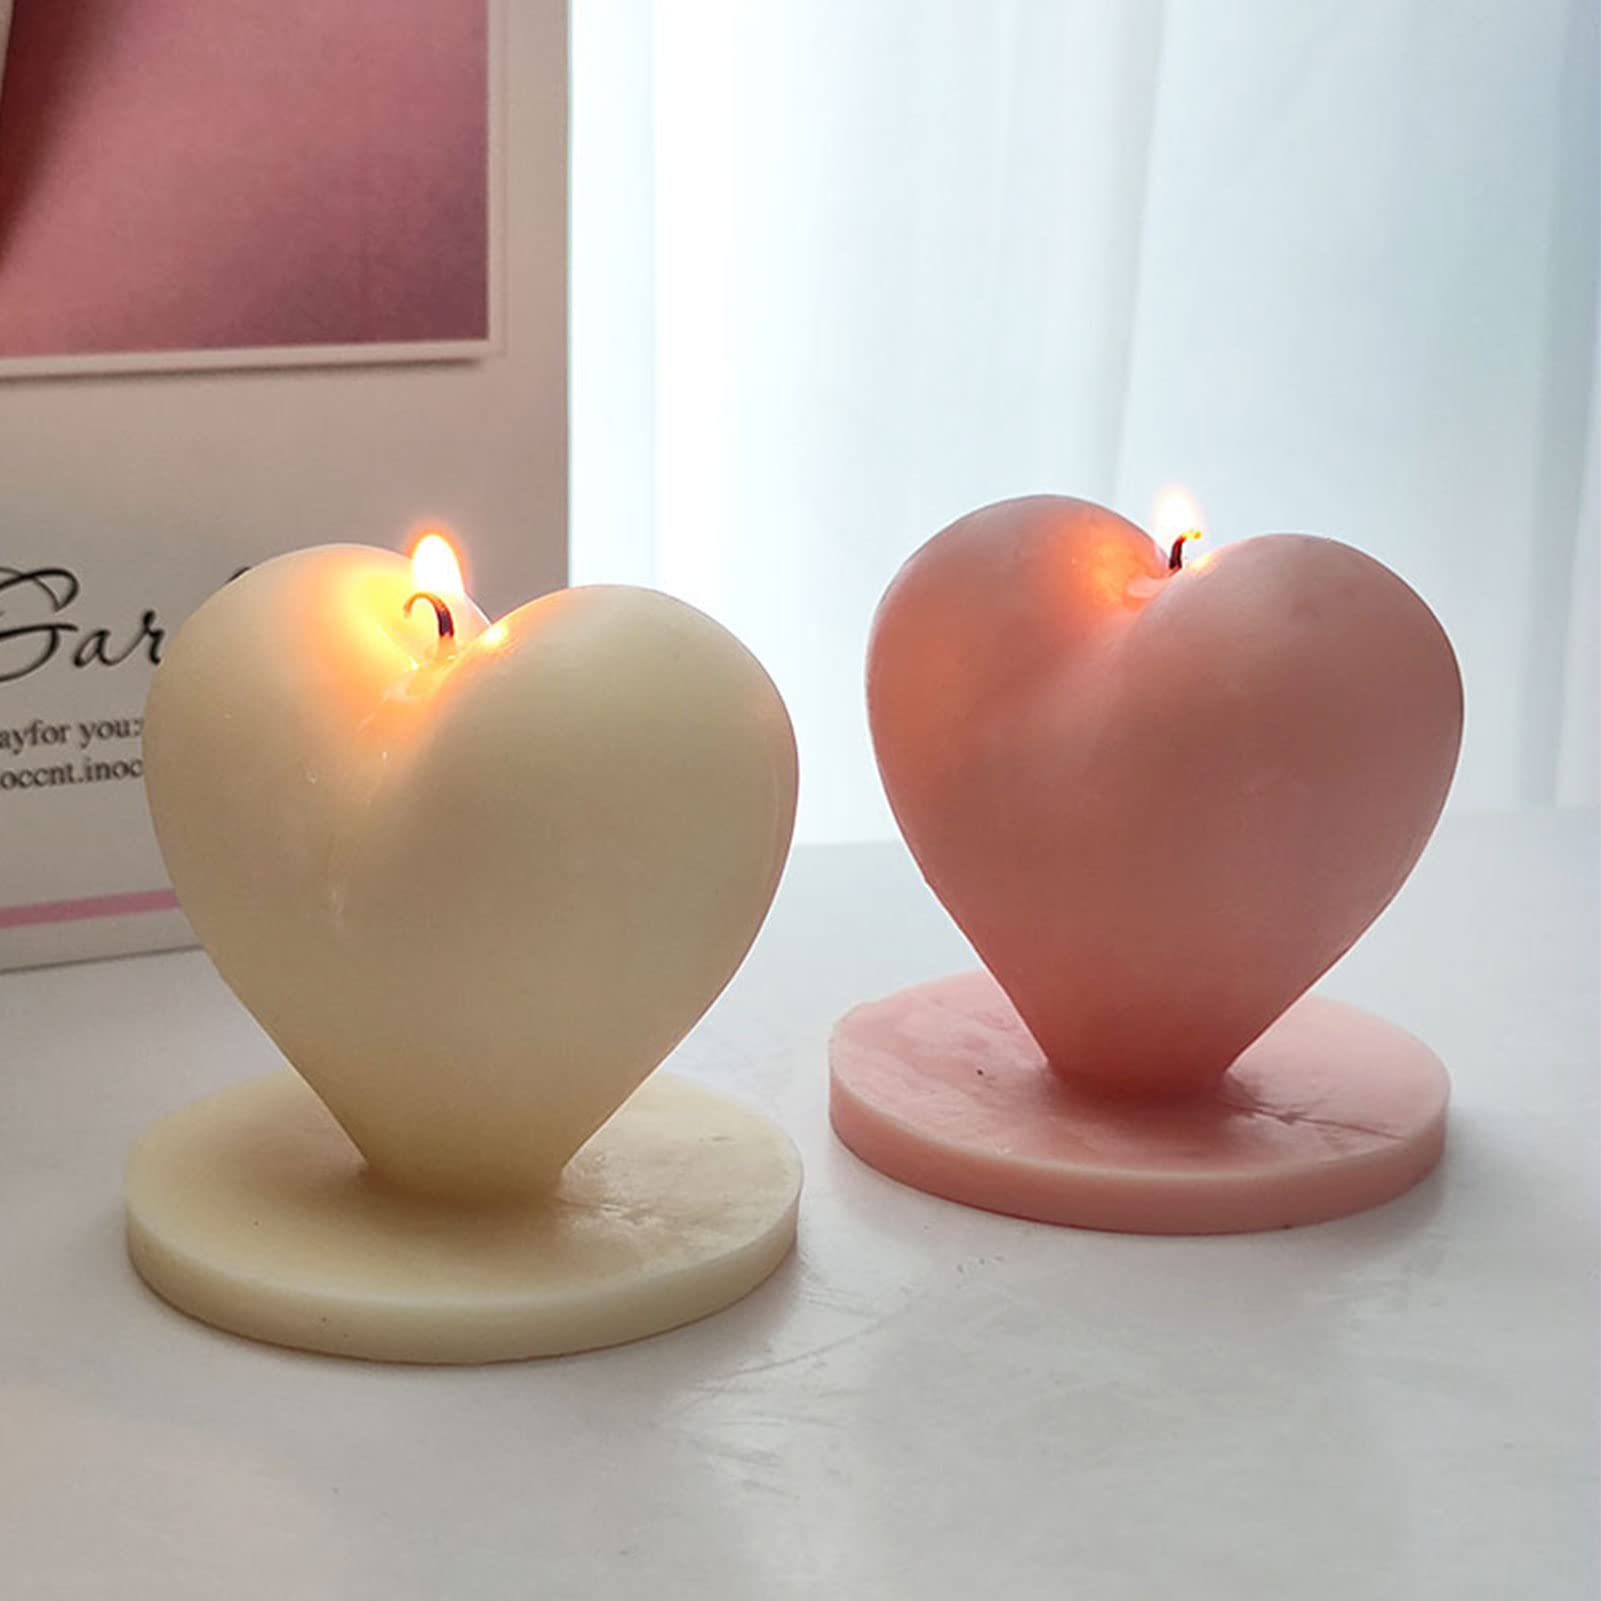  FineInno 2pcs 3D Heart Resin Mold, Grids Love Heart Silicone  Mold for Candle Soap Making, Woven Love Epoxy Mold for DIY Heart Bath Bomb  Fondant Chocolate Cake Decor : Arts, Crafts